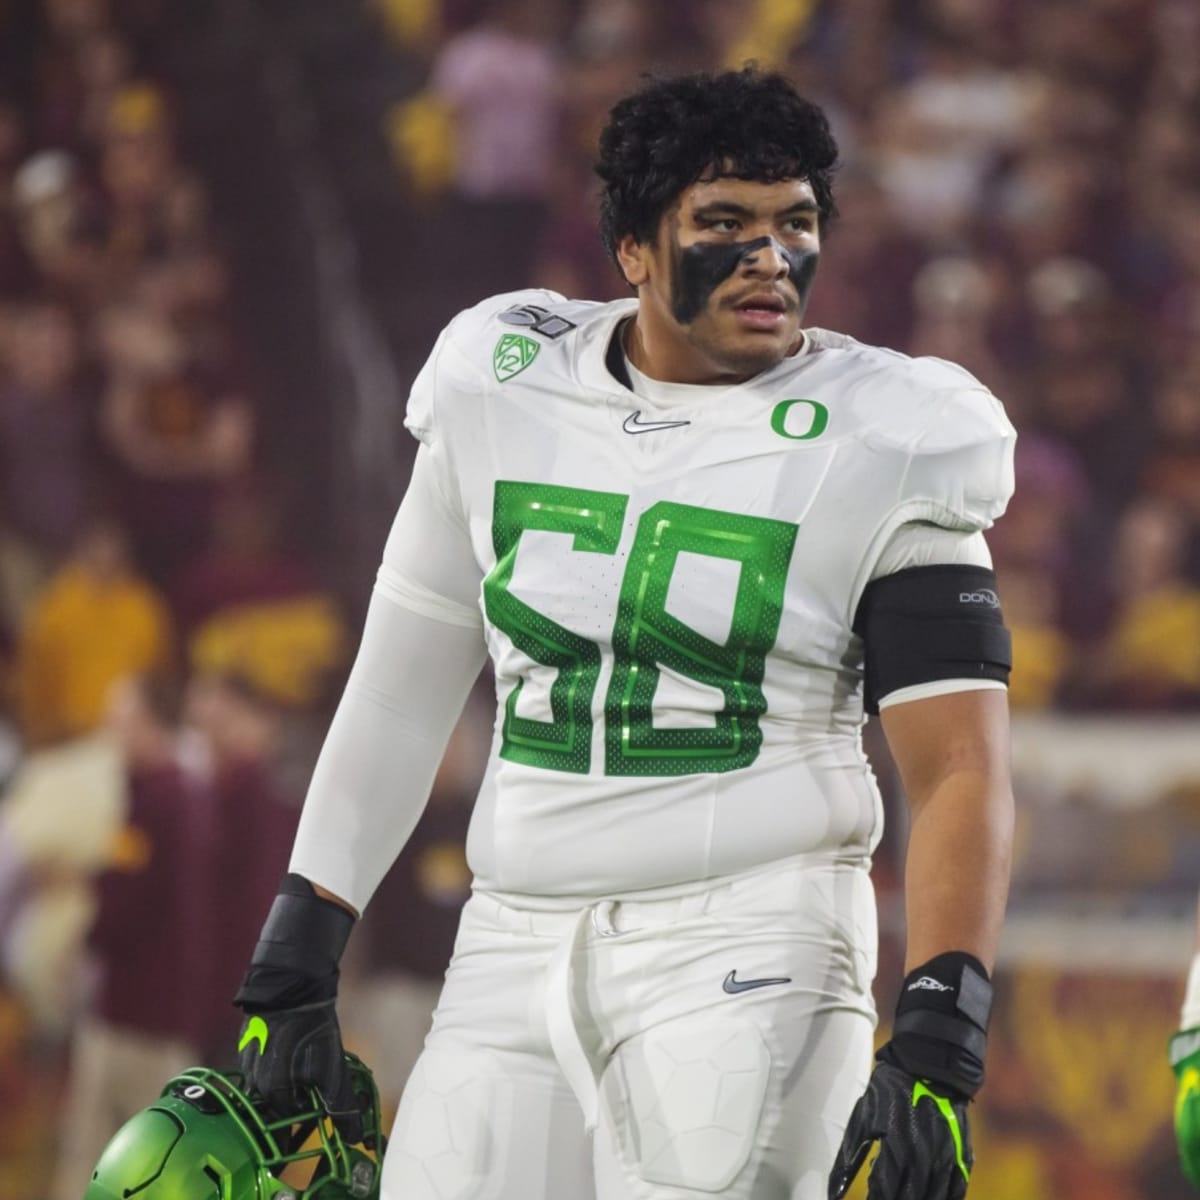 NFL draft 2021: Former Oregon star Penei Sewell selected by